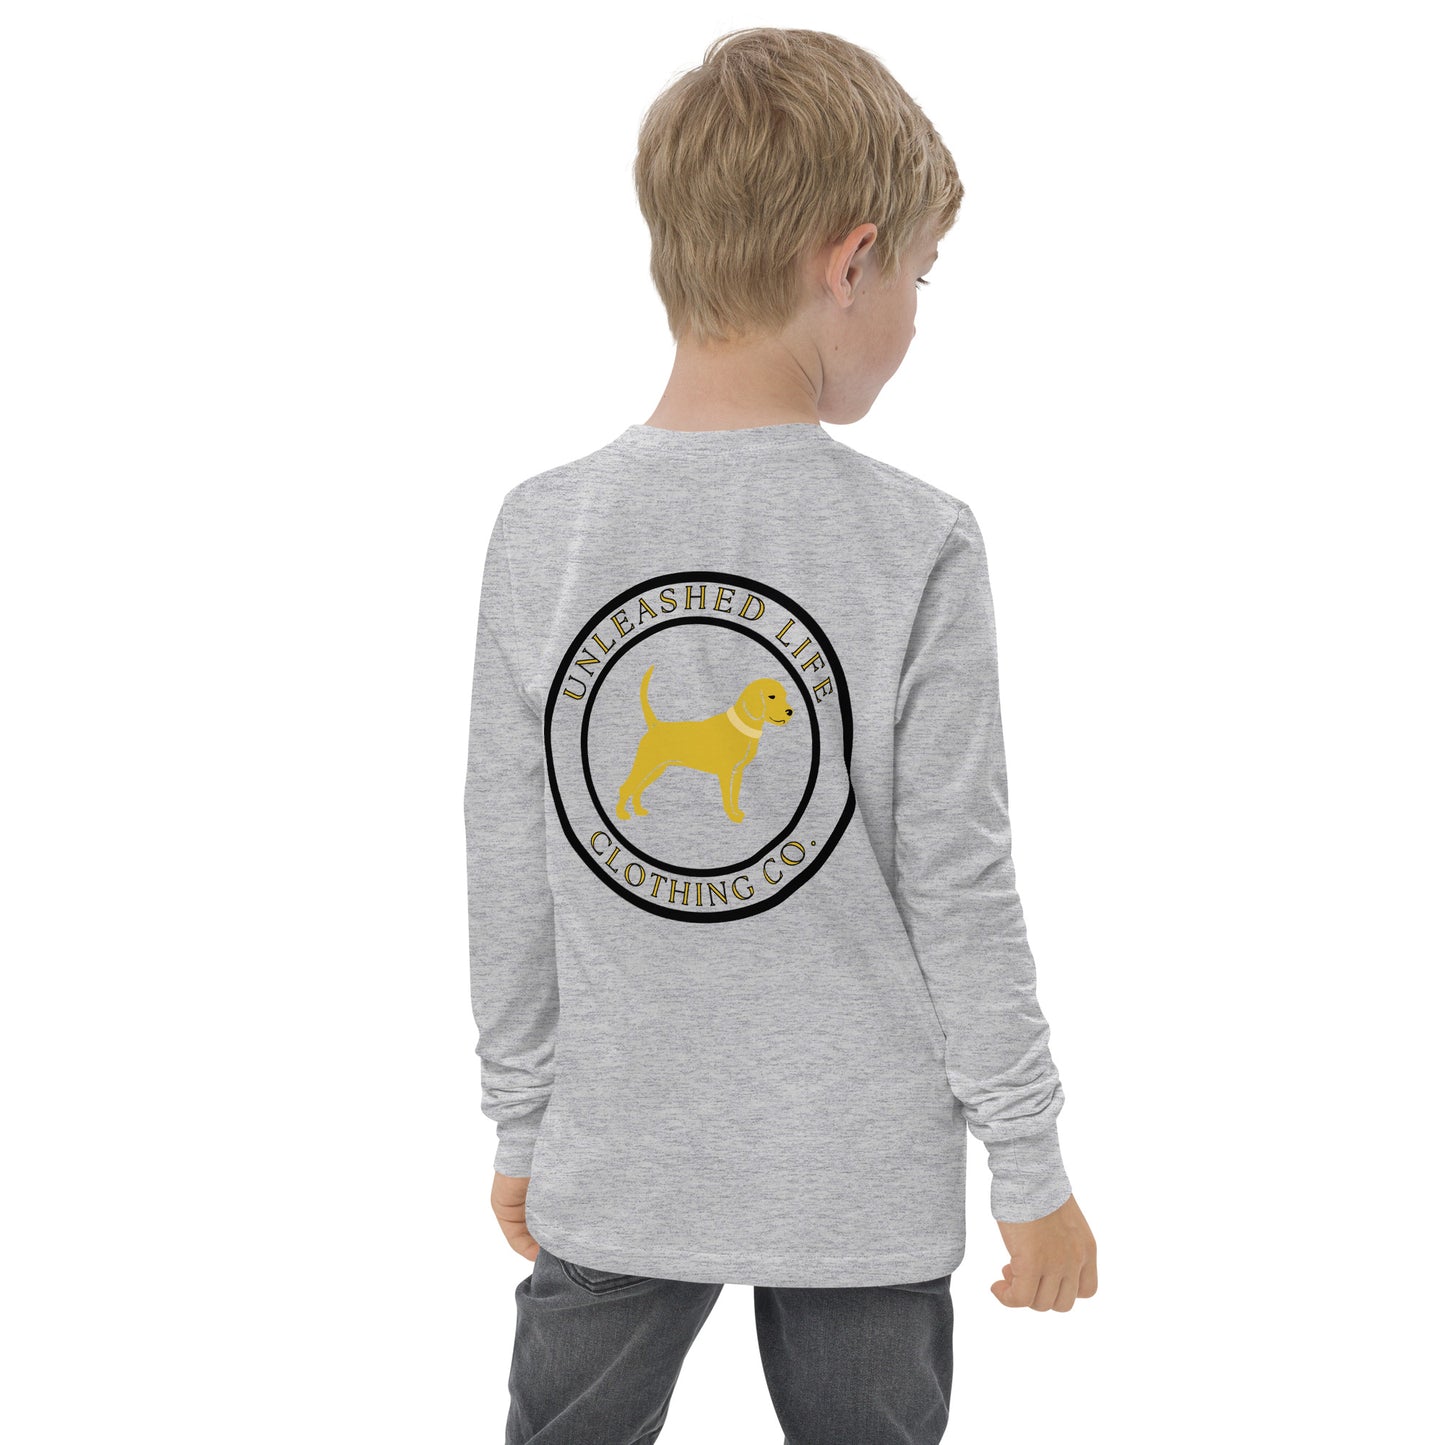 LIve Life Unleashed Youth long sleeve tee